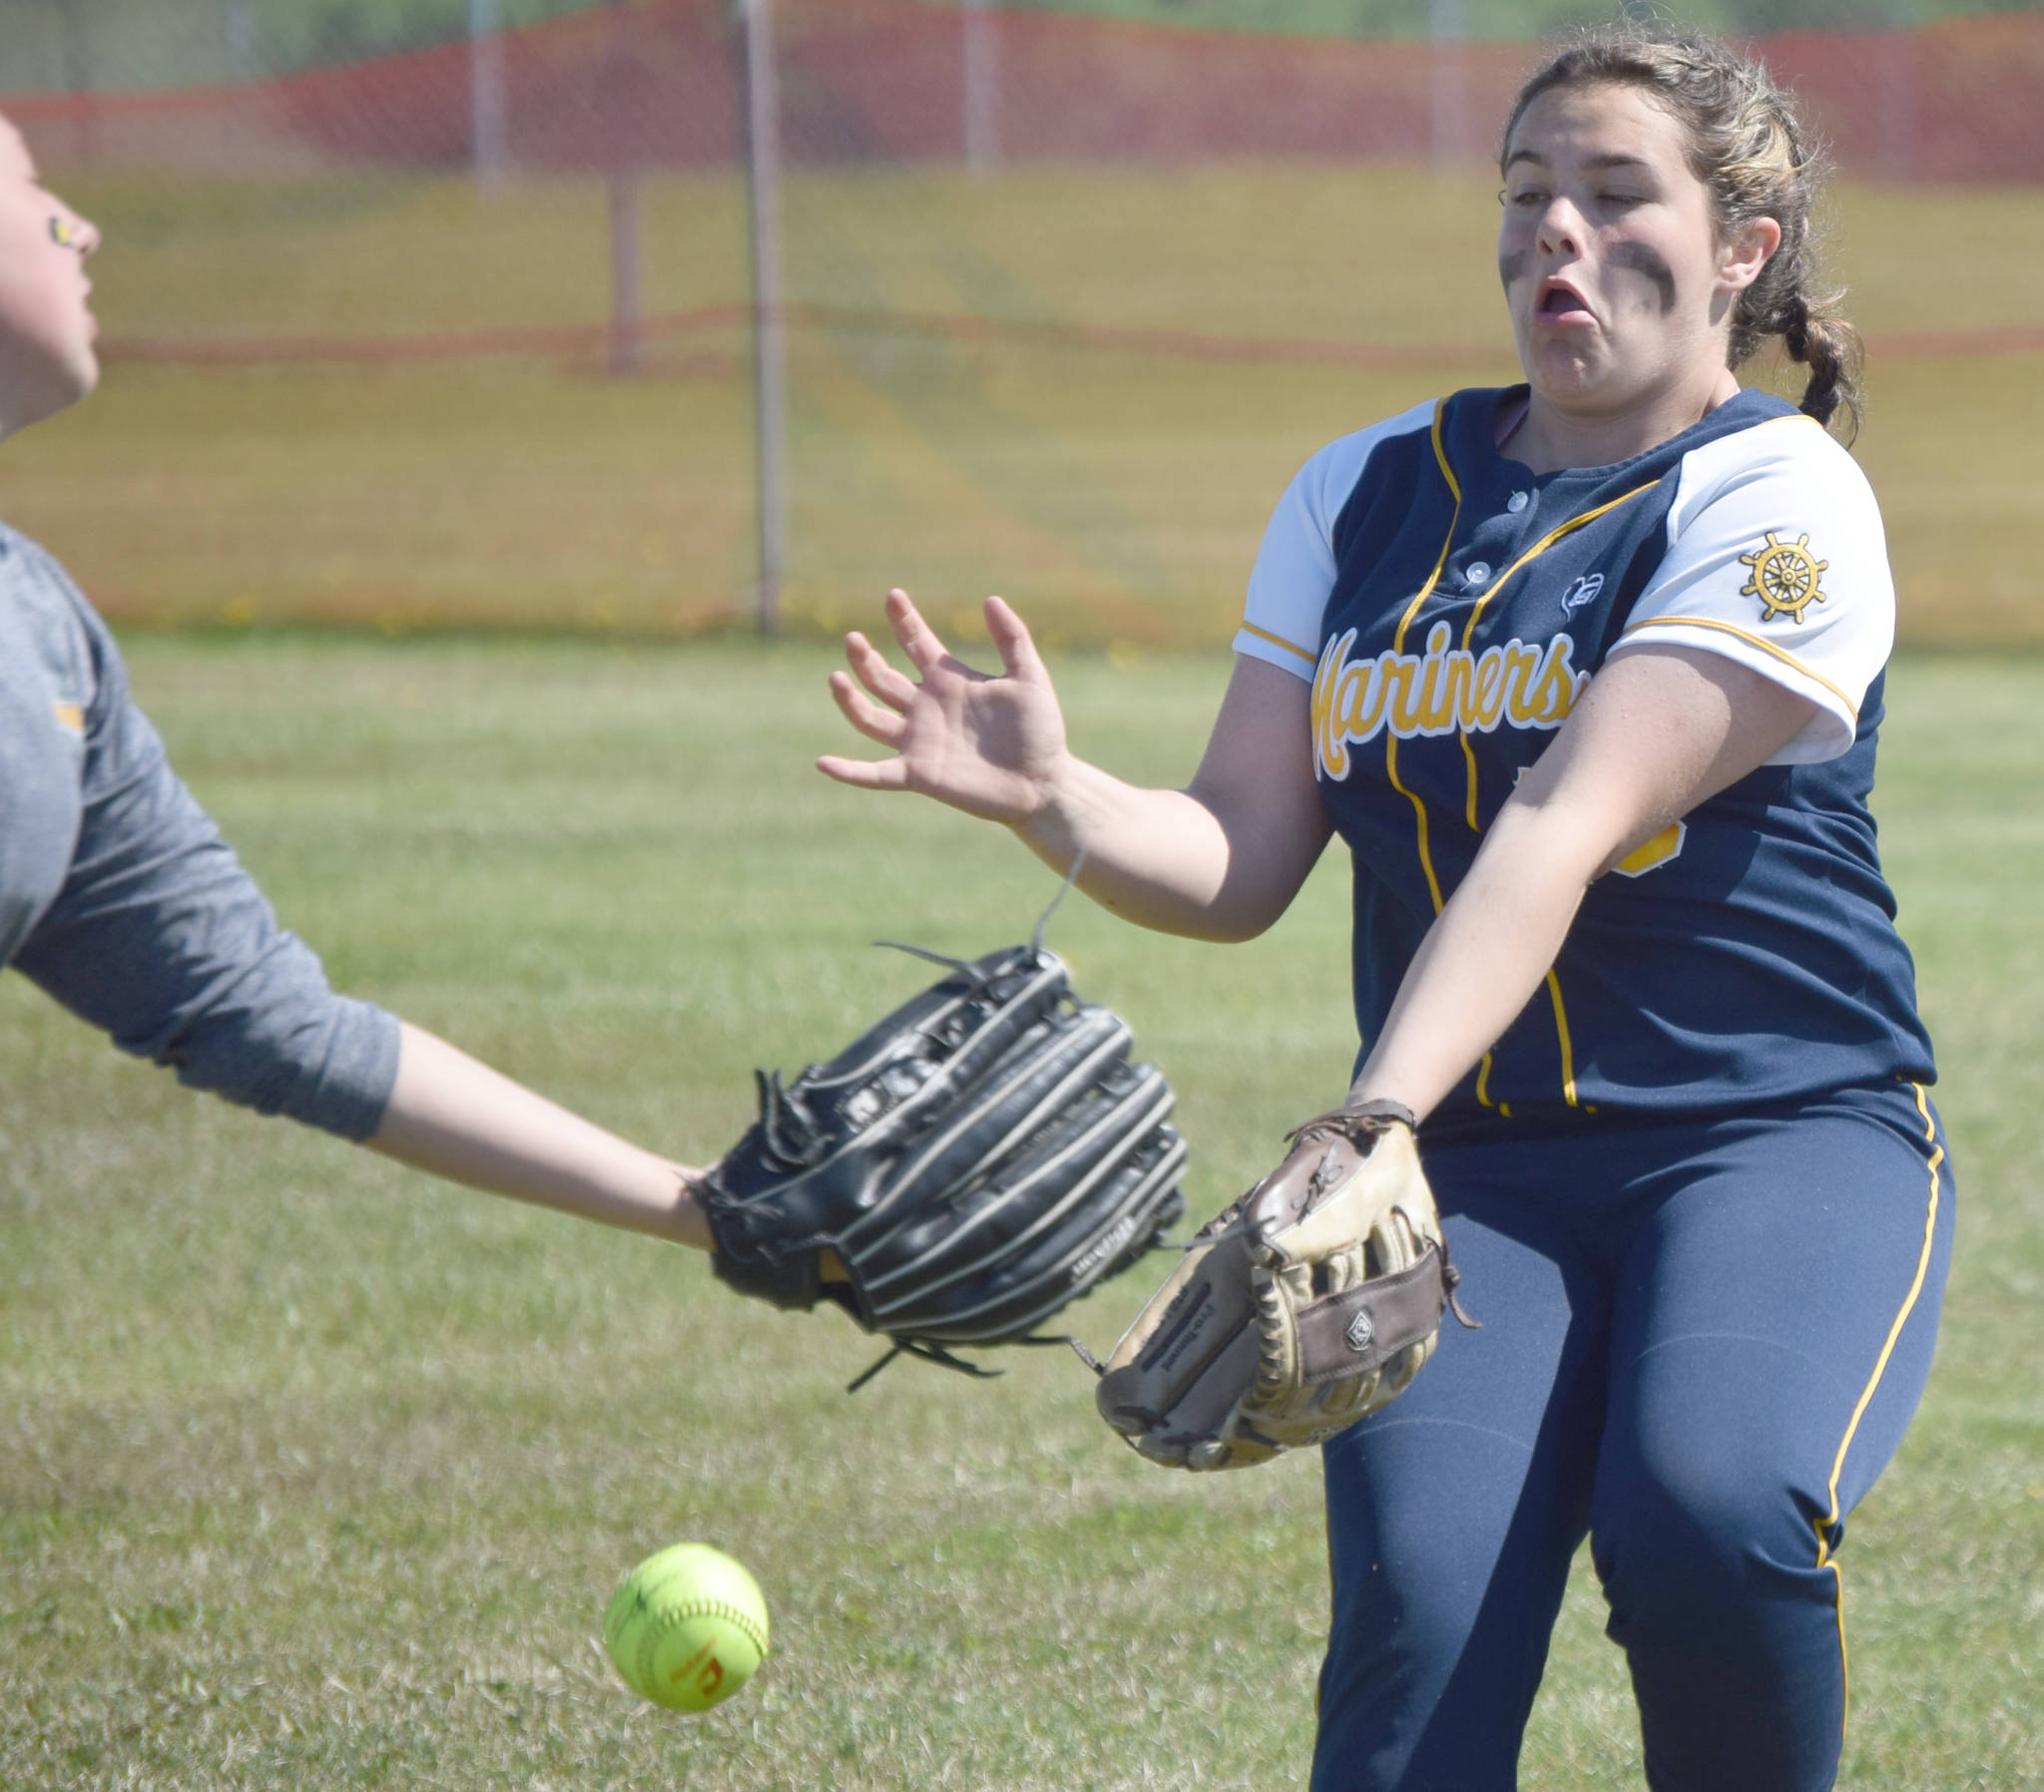 A ball hit by Bailey Smith of Soldotna drops between Homer second baseman Hannah Hatfield and right fielder Zoe Adkins on Friday, May 24, 2019, during the Northern Lights Conference softball tournament at Steve Shearer Memorial Ball Park in Kenai, Alaska. (Photo by Jeff Helminiak/Peninsula Clarion)